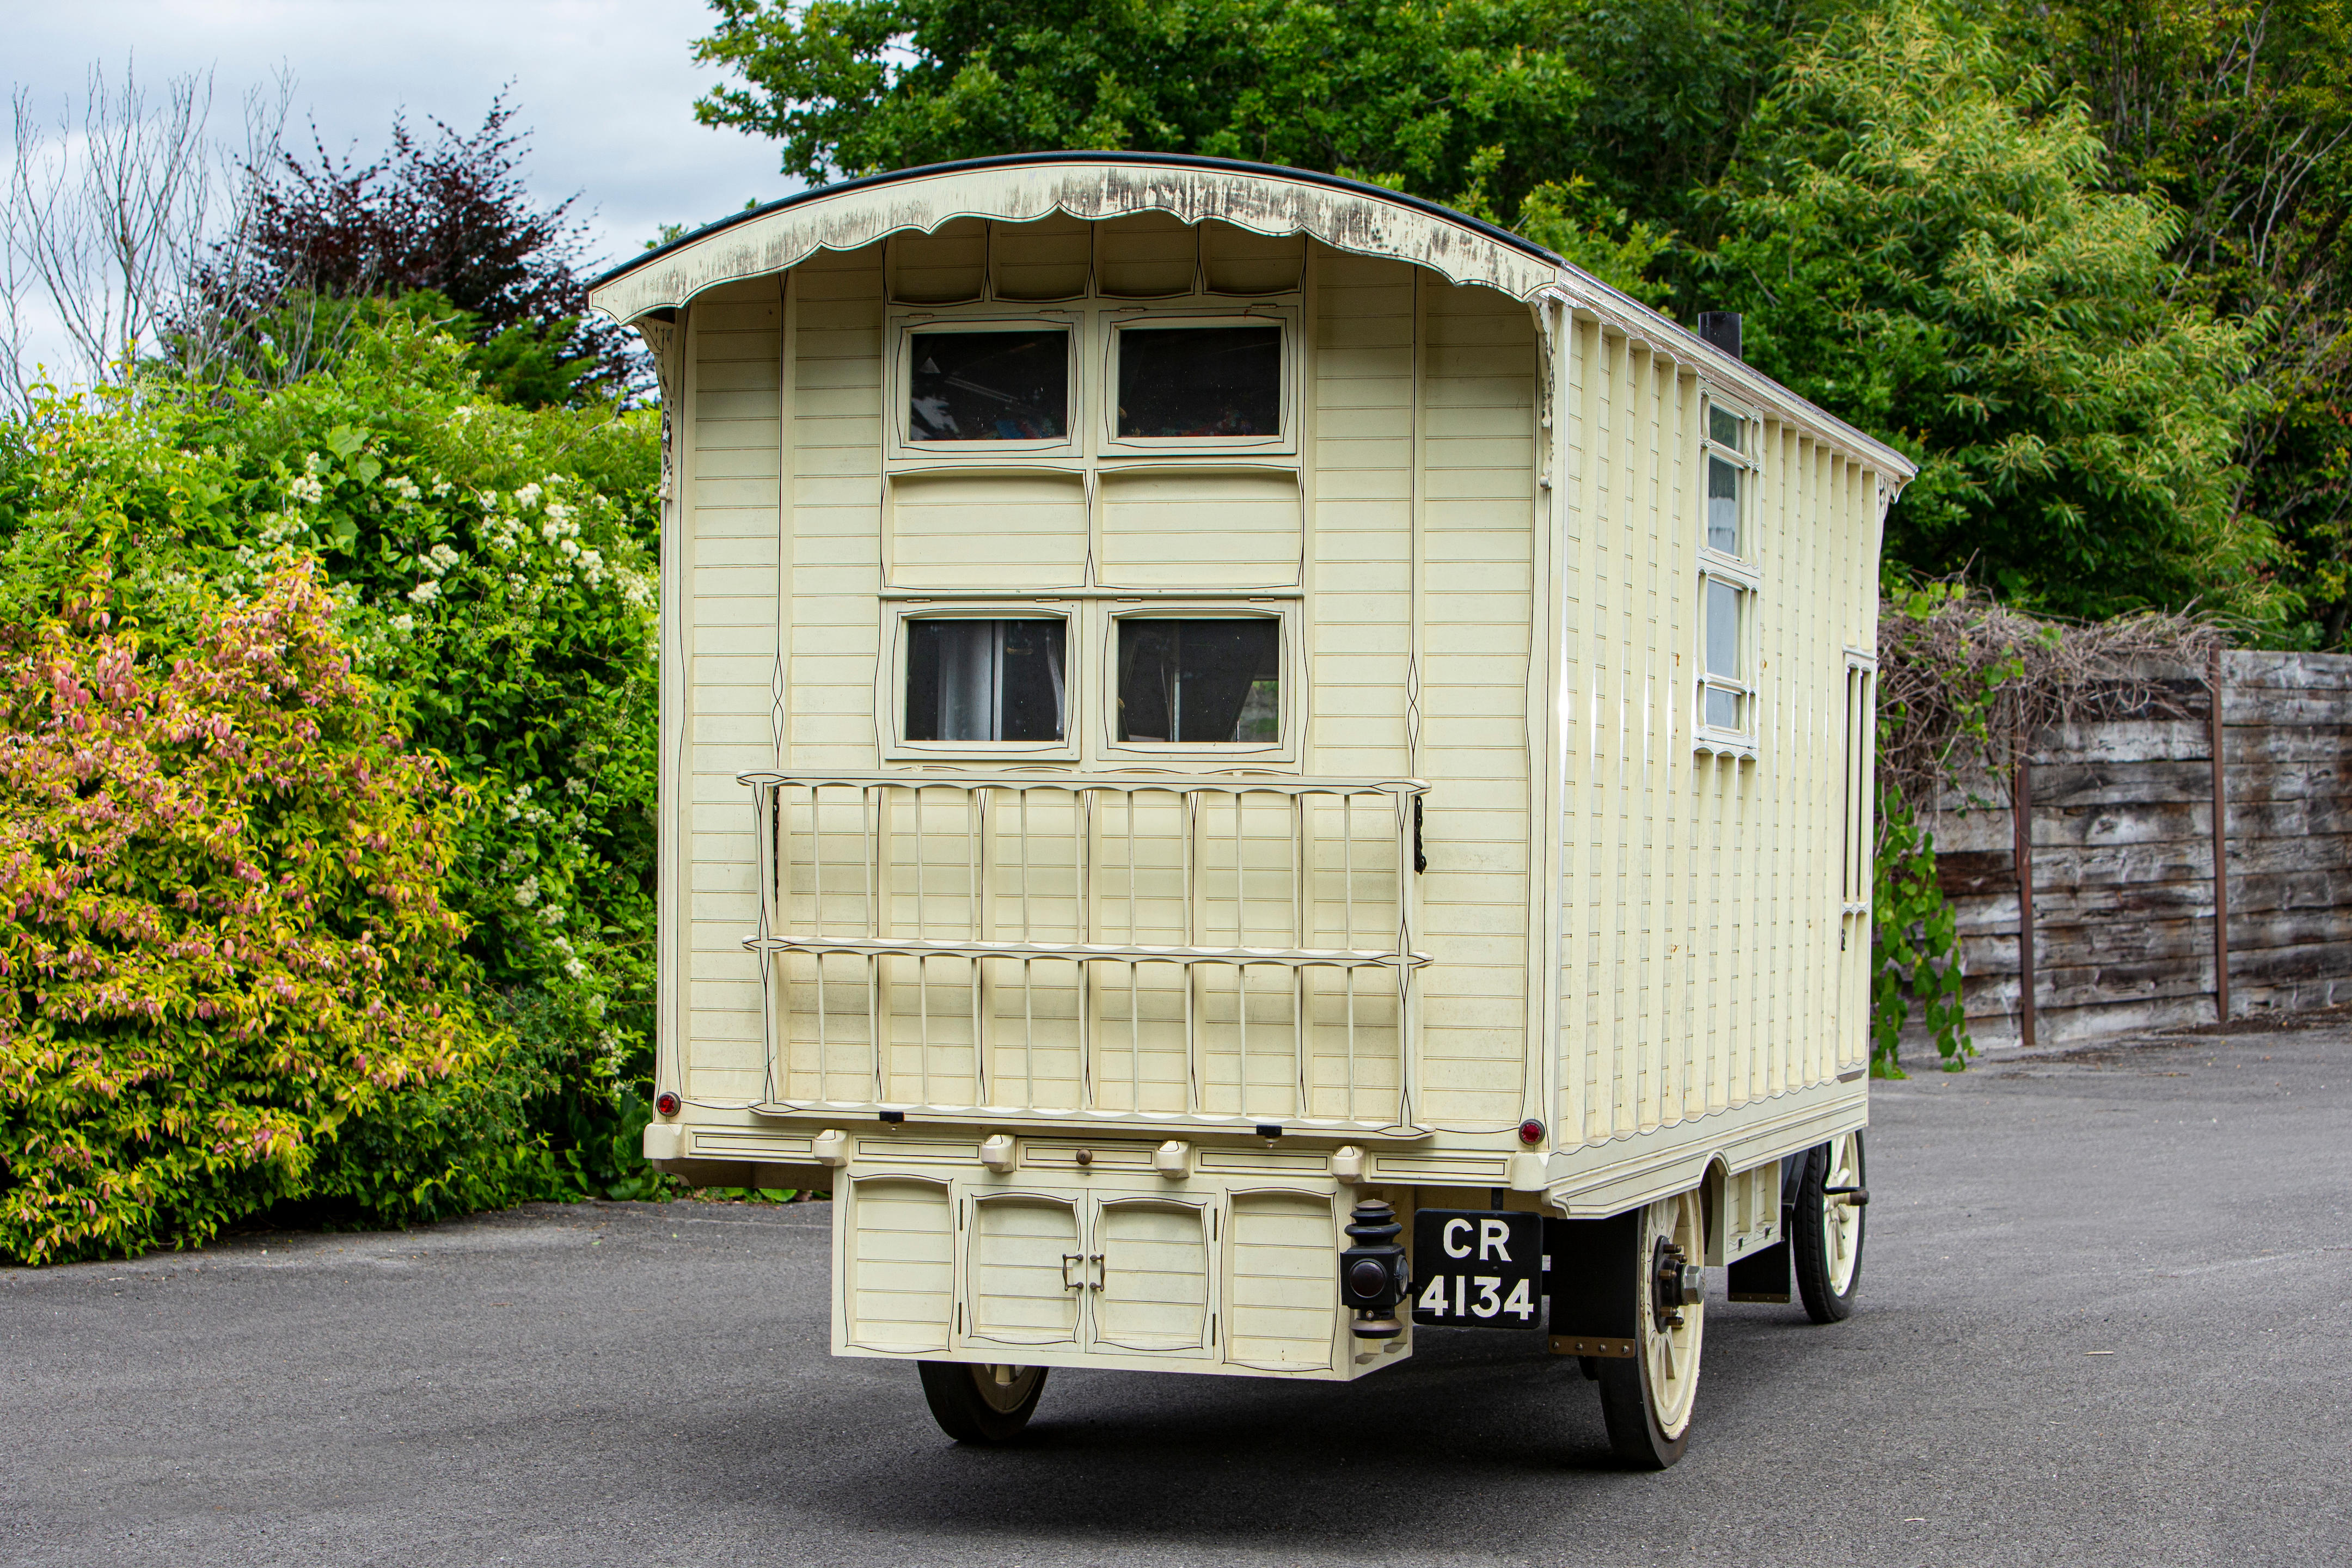 The oldest camper in the world goes under the hammer – image 2